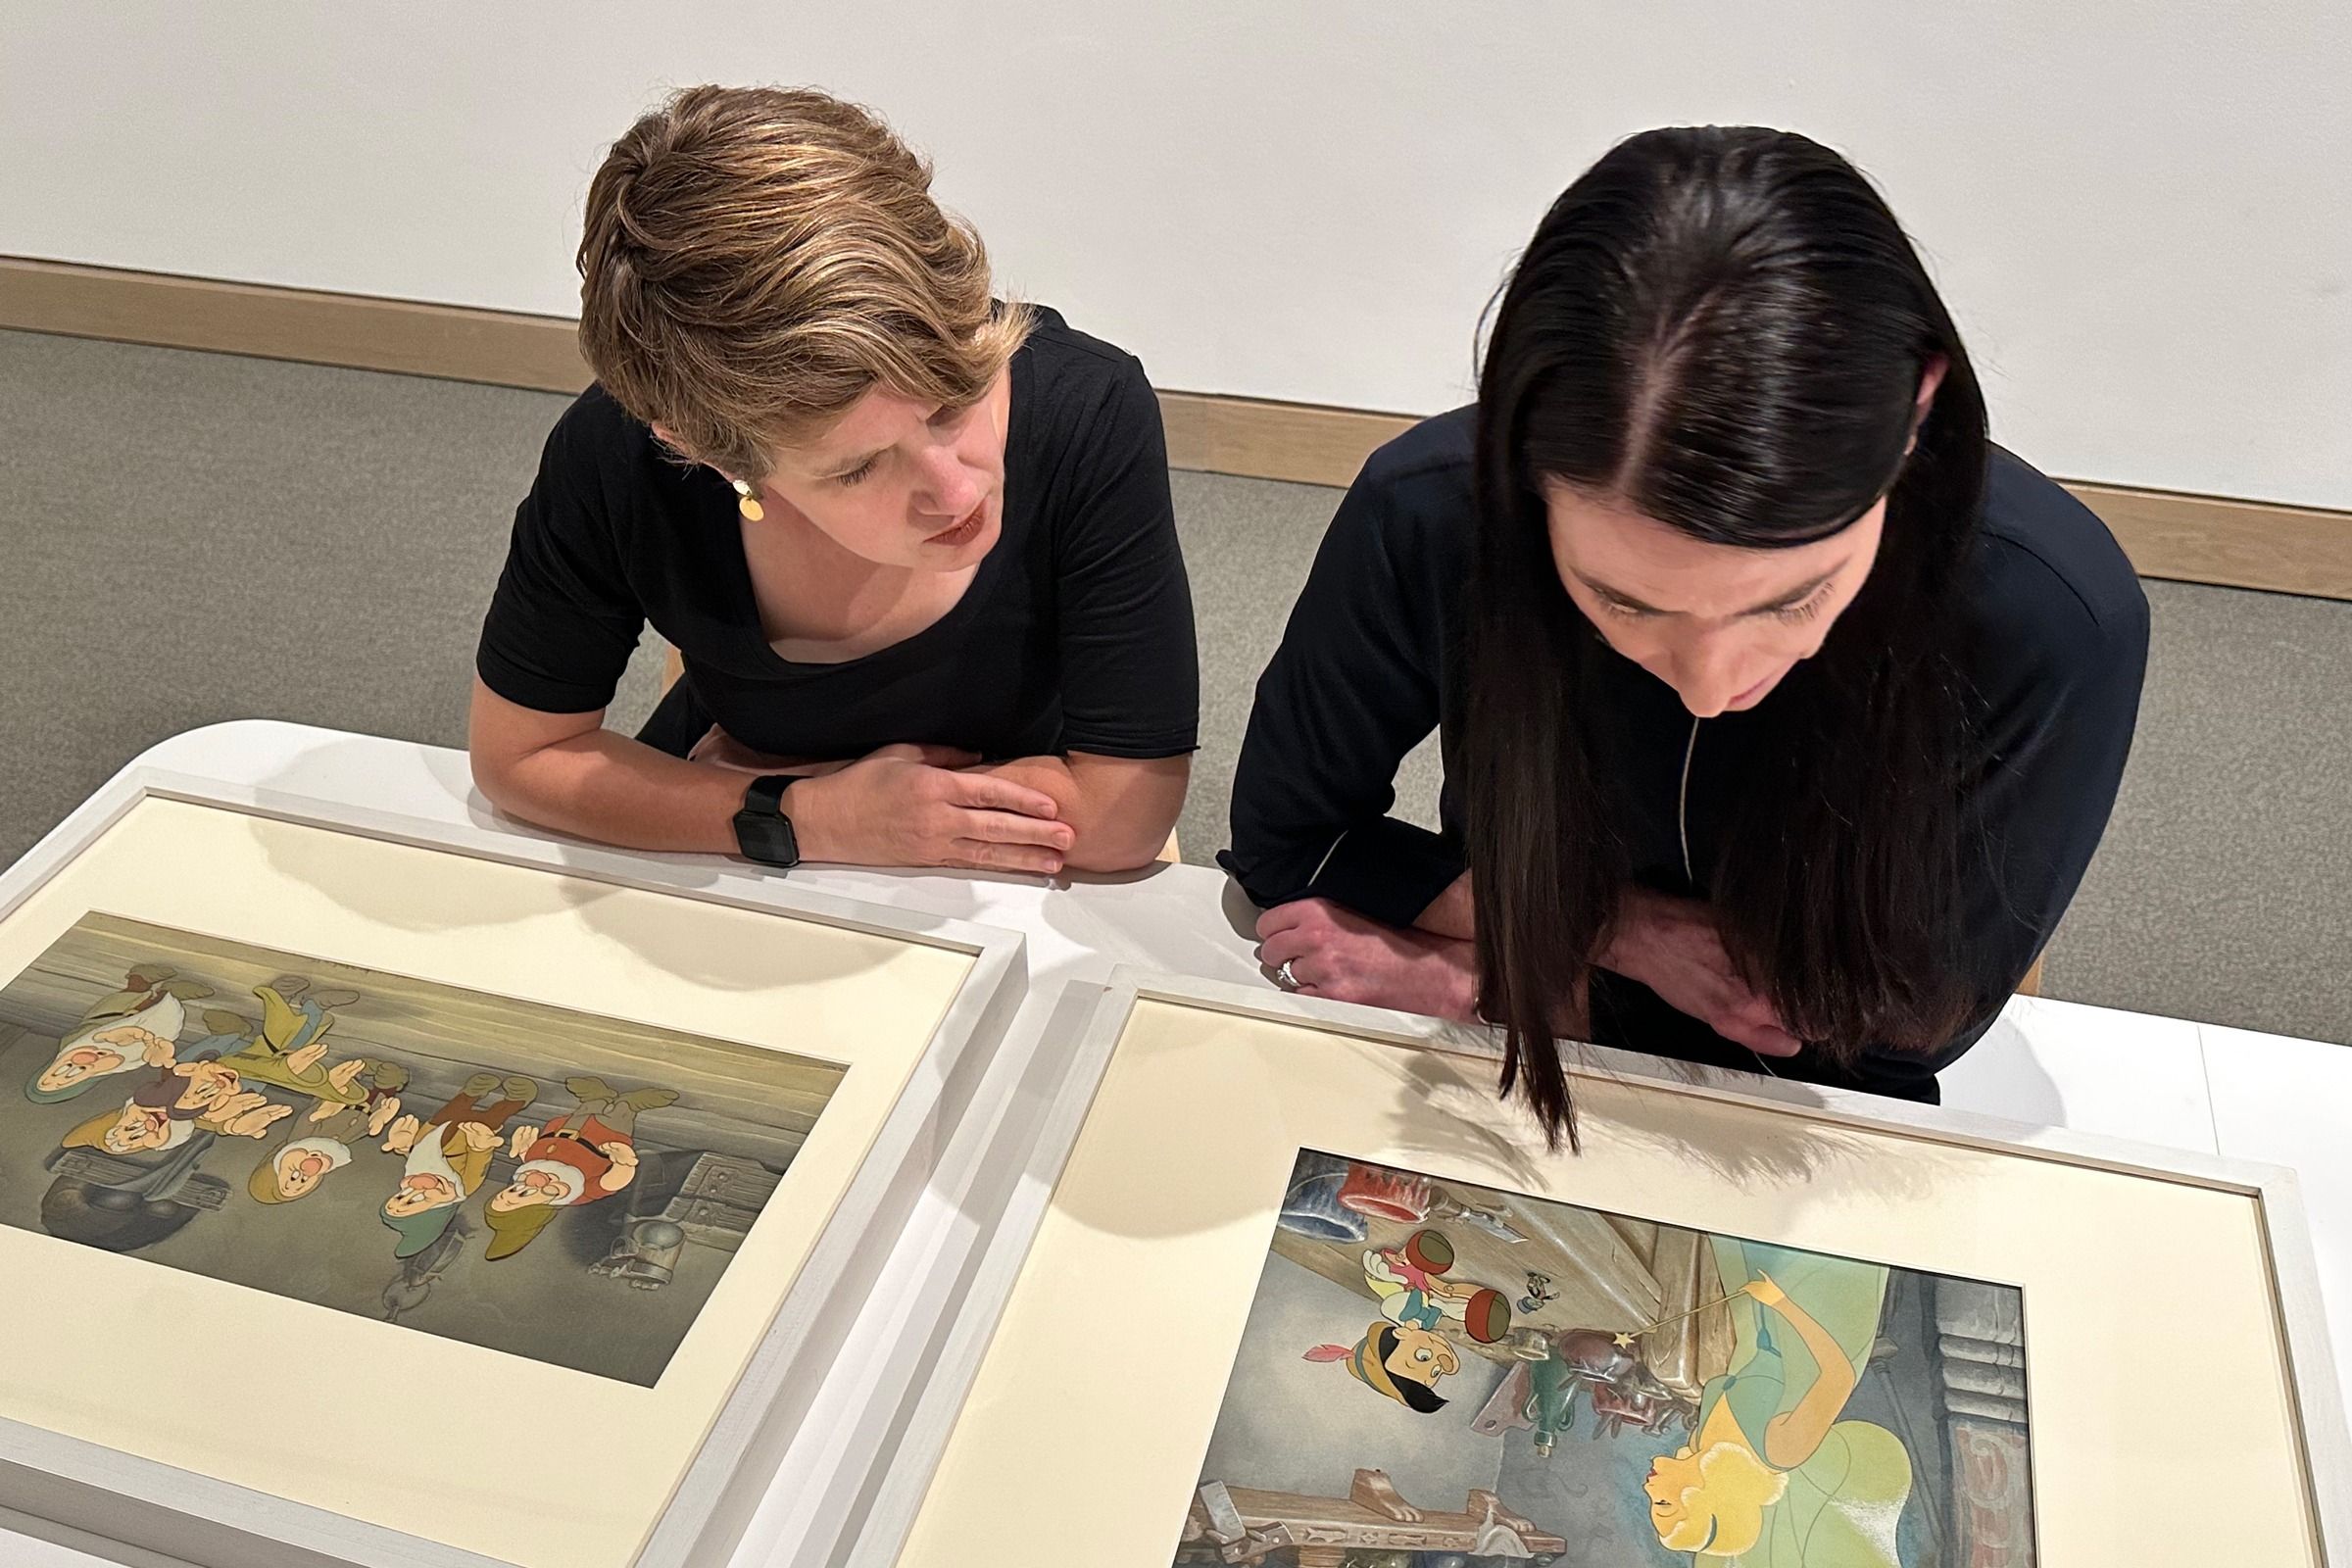 Holian and Stamey lookkng at prints from Snow White and Pinocchio